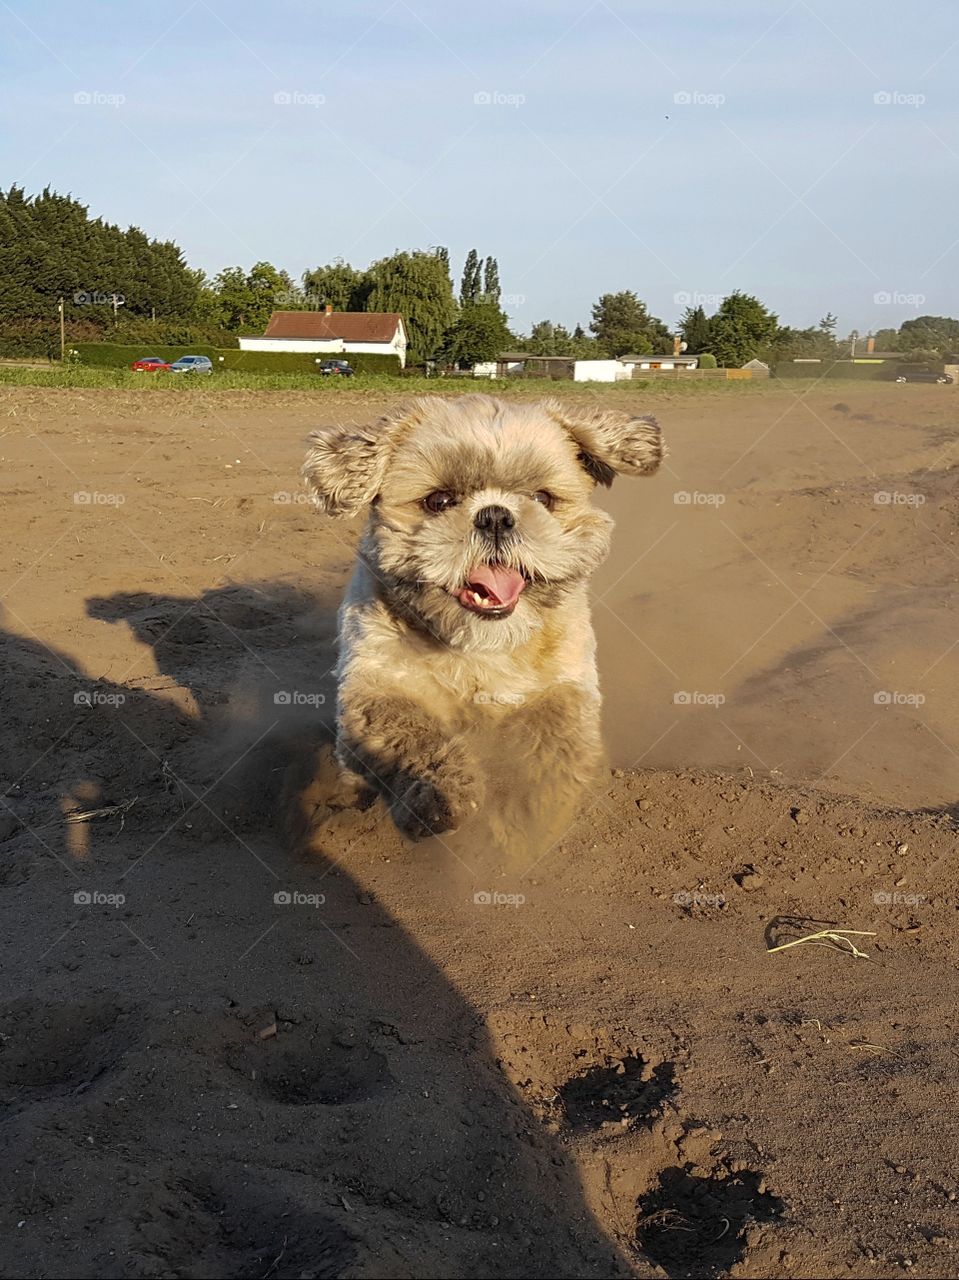 a handsome young dog runs playfully in the sand towards the viewer.